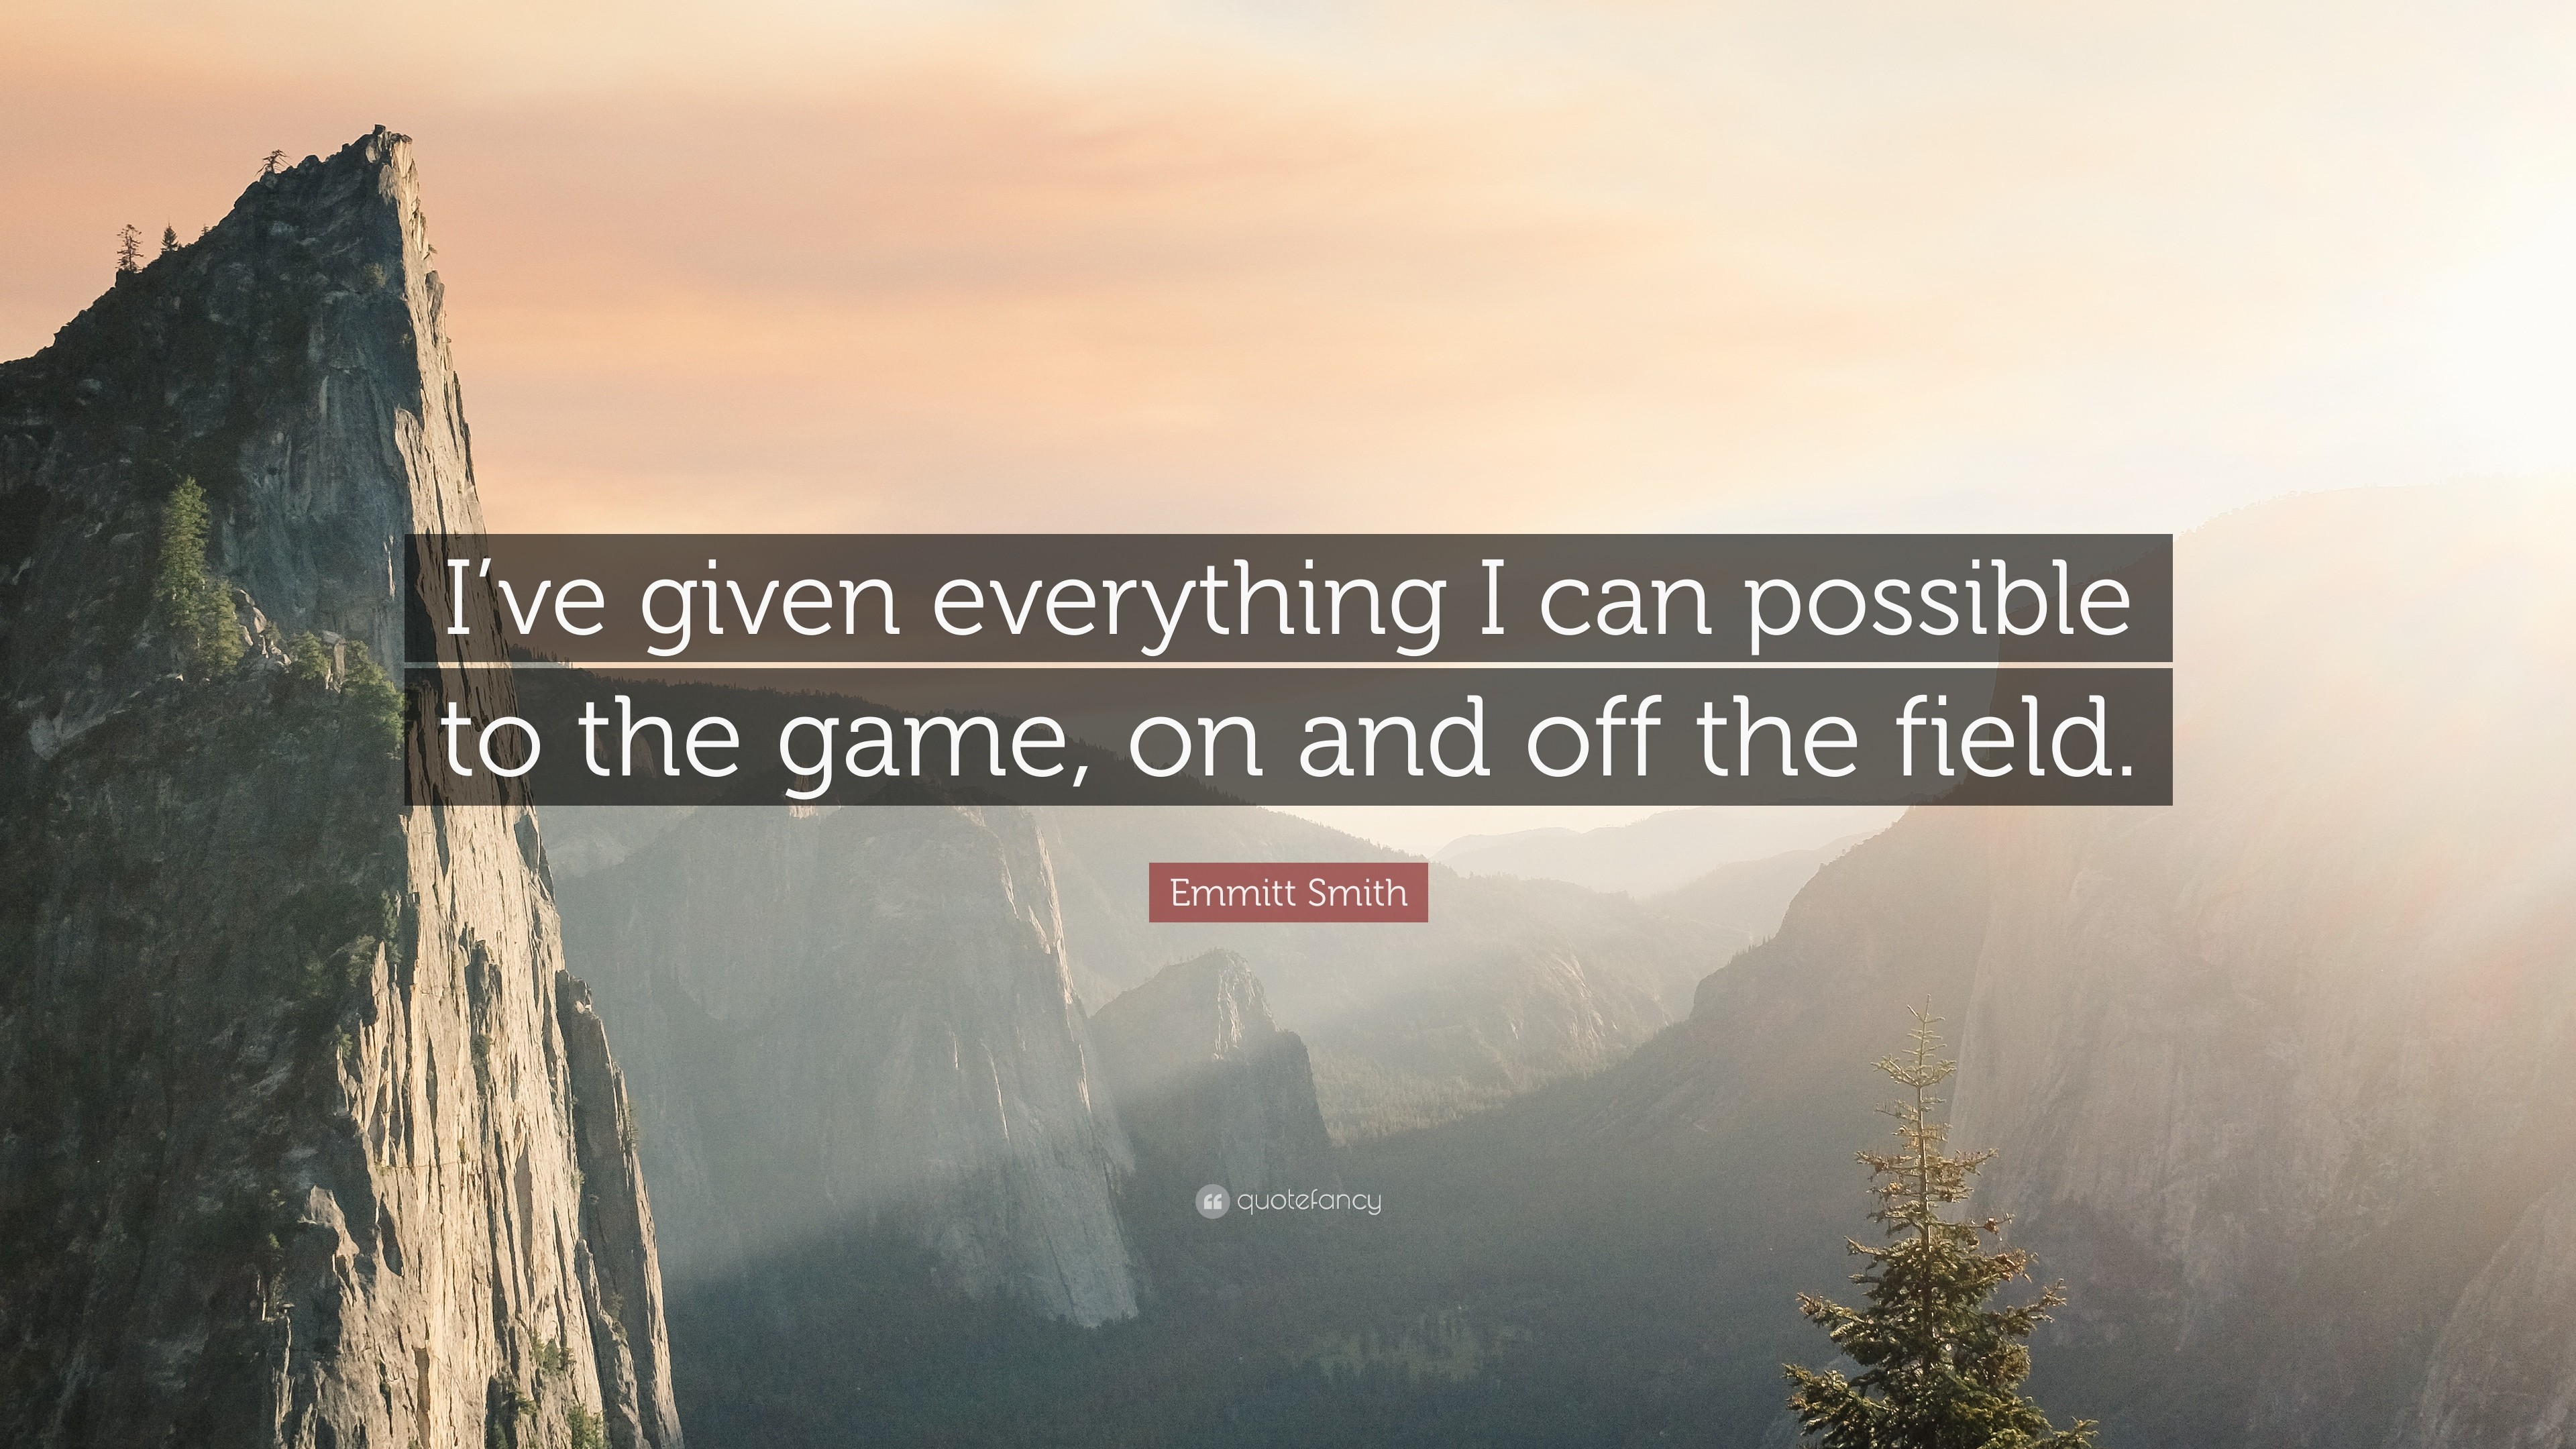 3840x2160 Emmitt Smith Quote: “I've given everything I can possible to the game